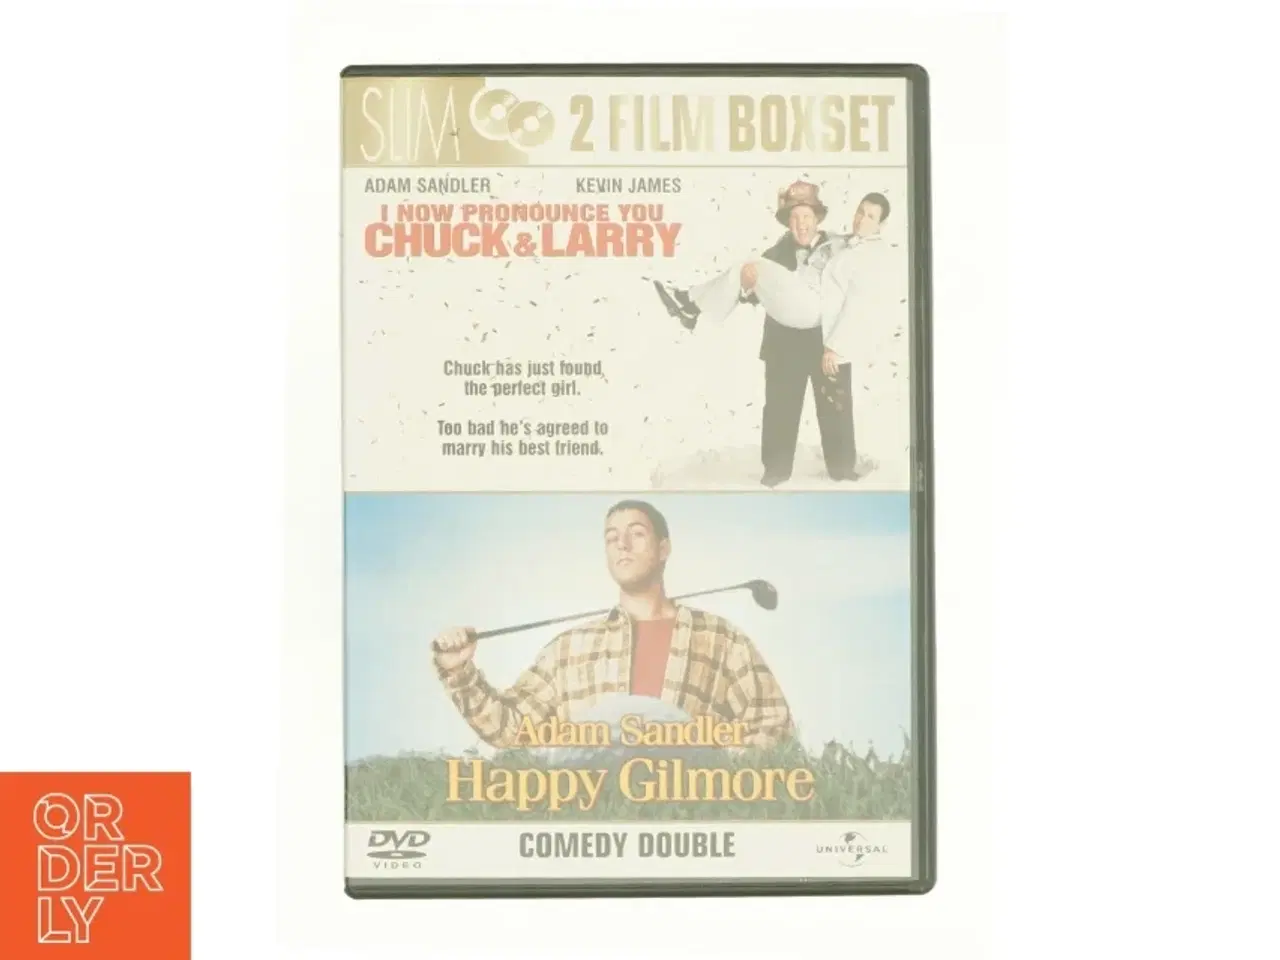 Billede 1 - I kow pronounce you Chuck and Larry + Happy Gilmore